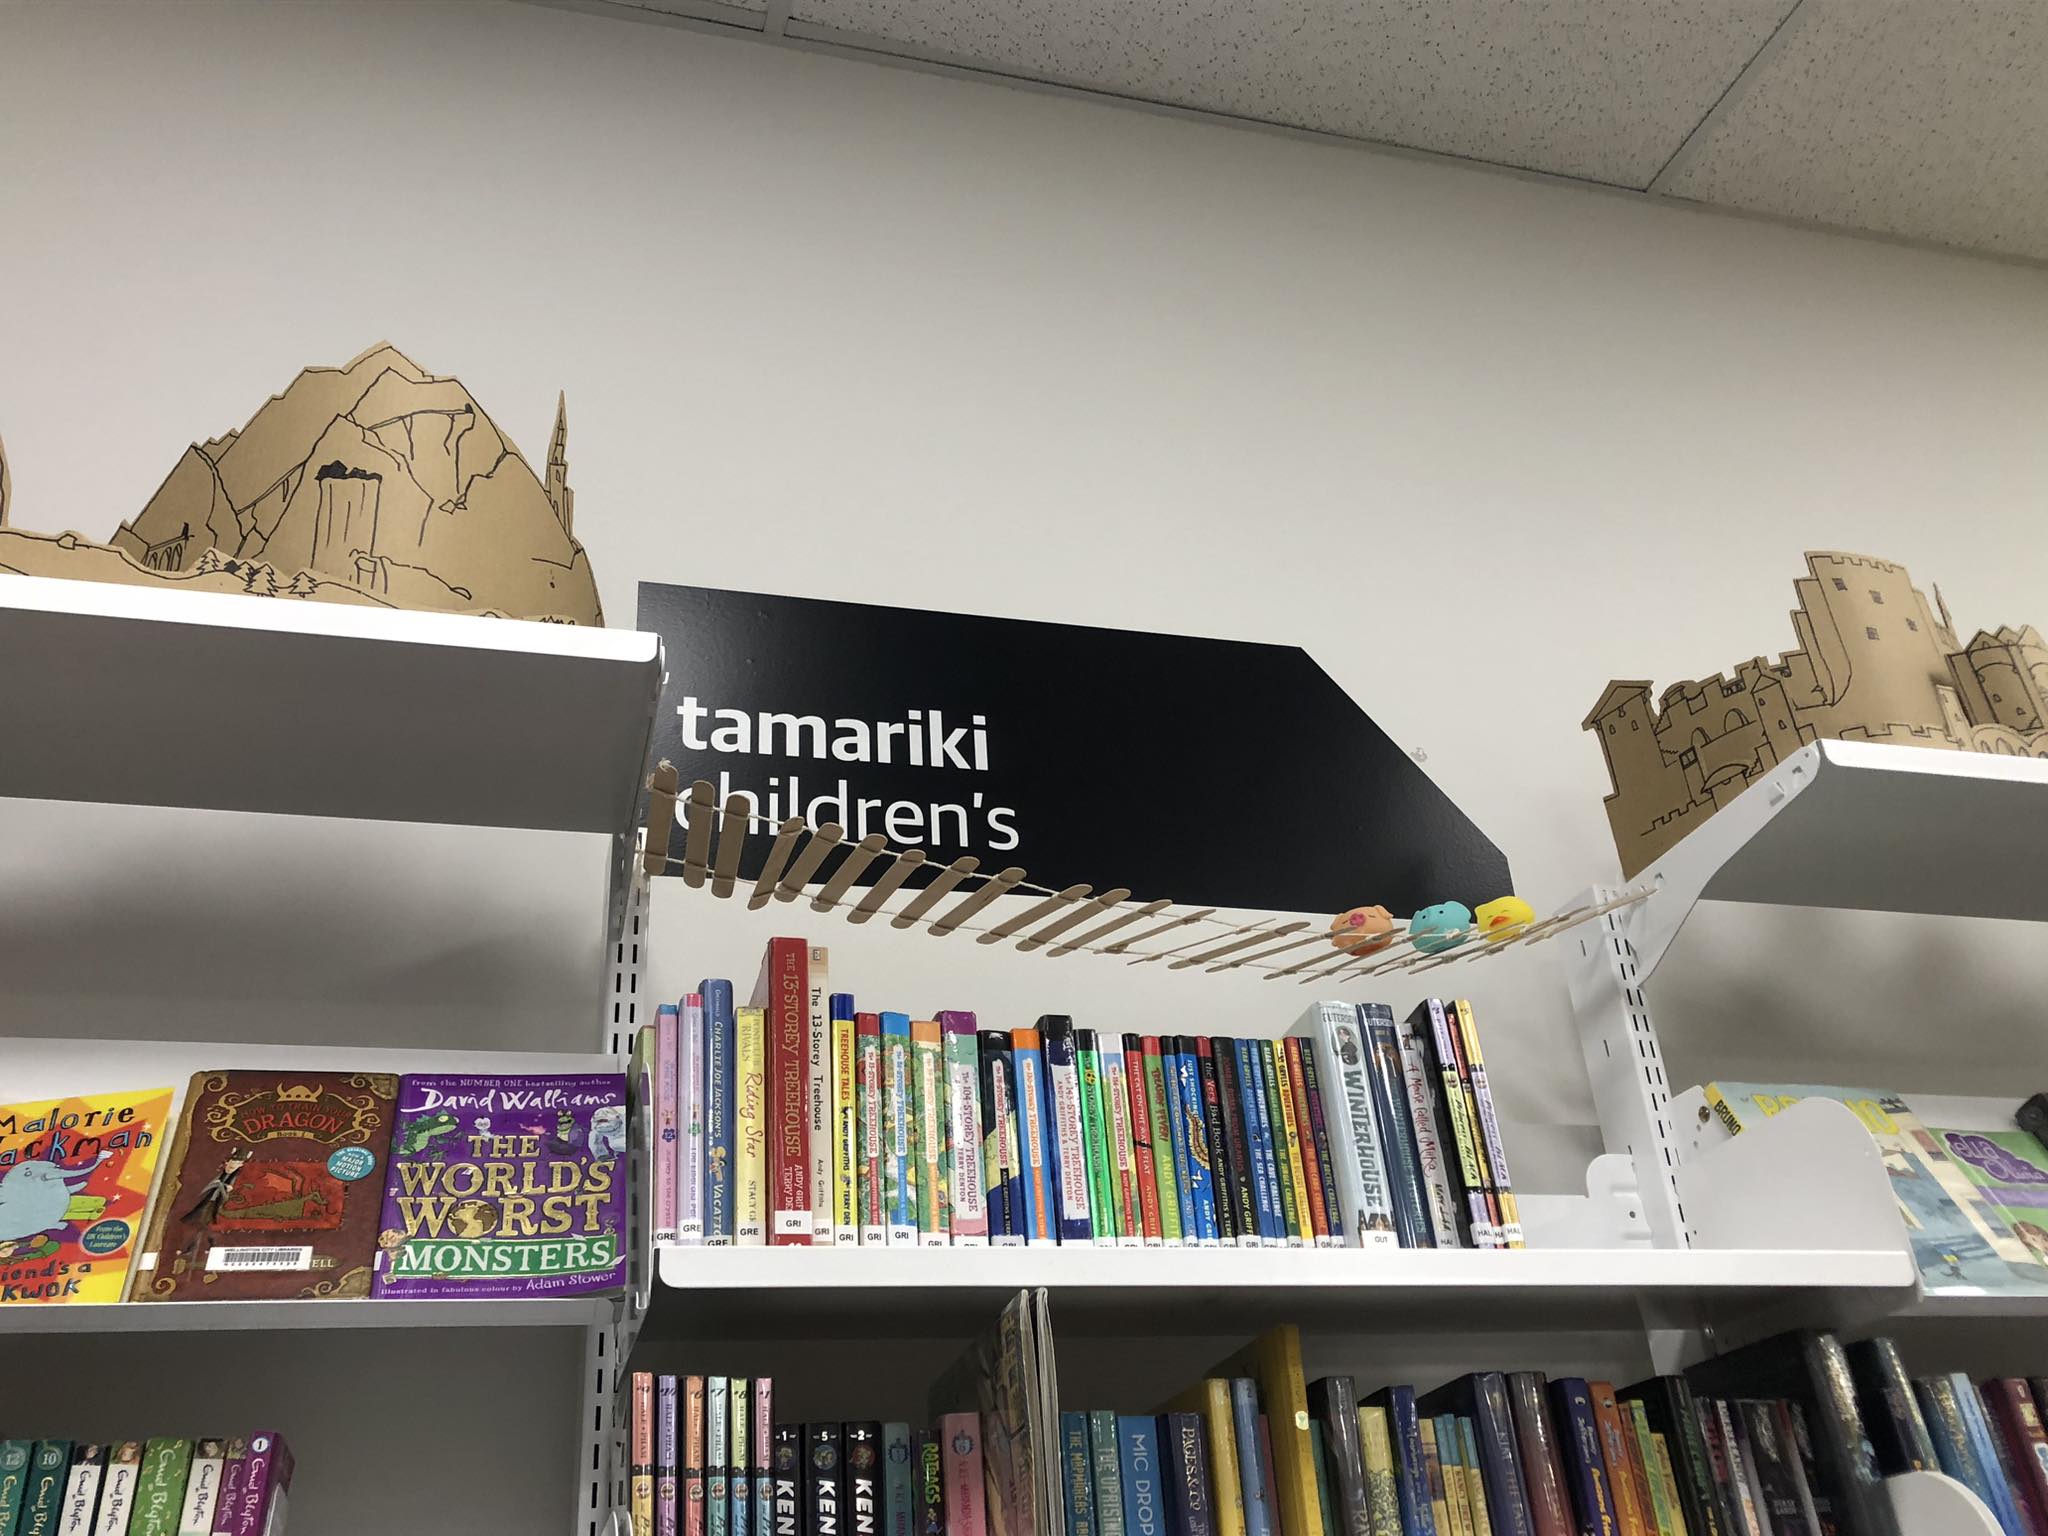 A rope bridge made of twine and popsicle sticks bridges the gap between two bookshelves.